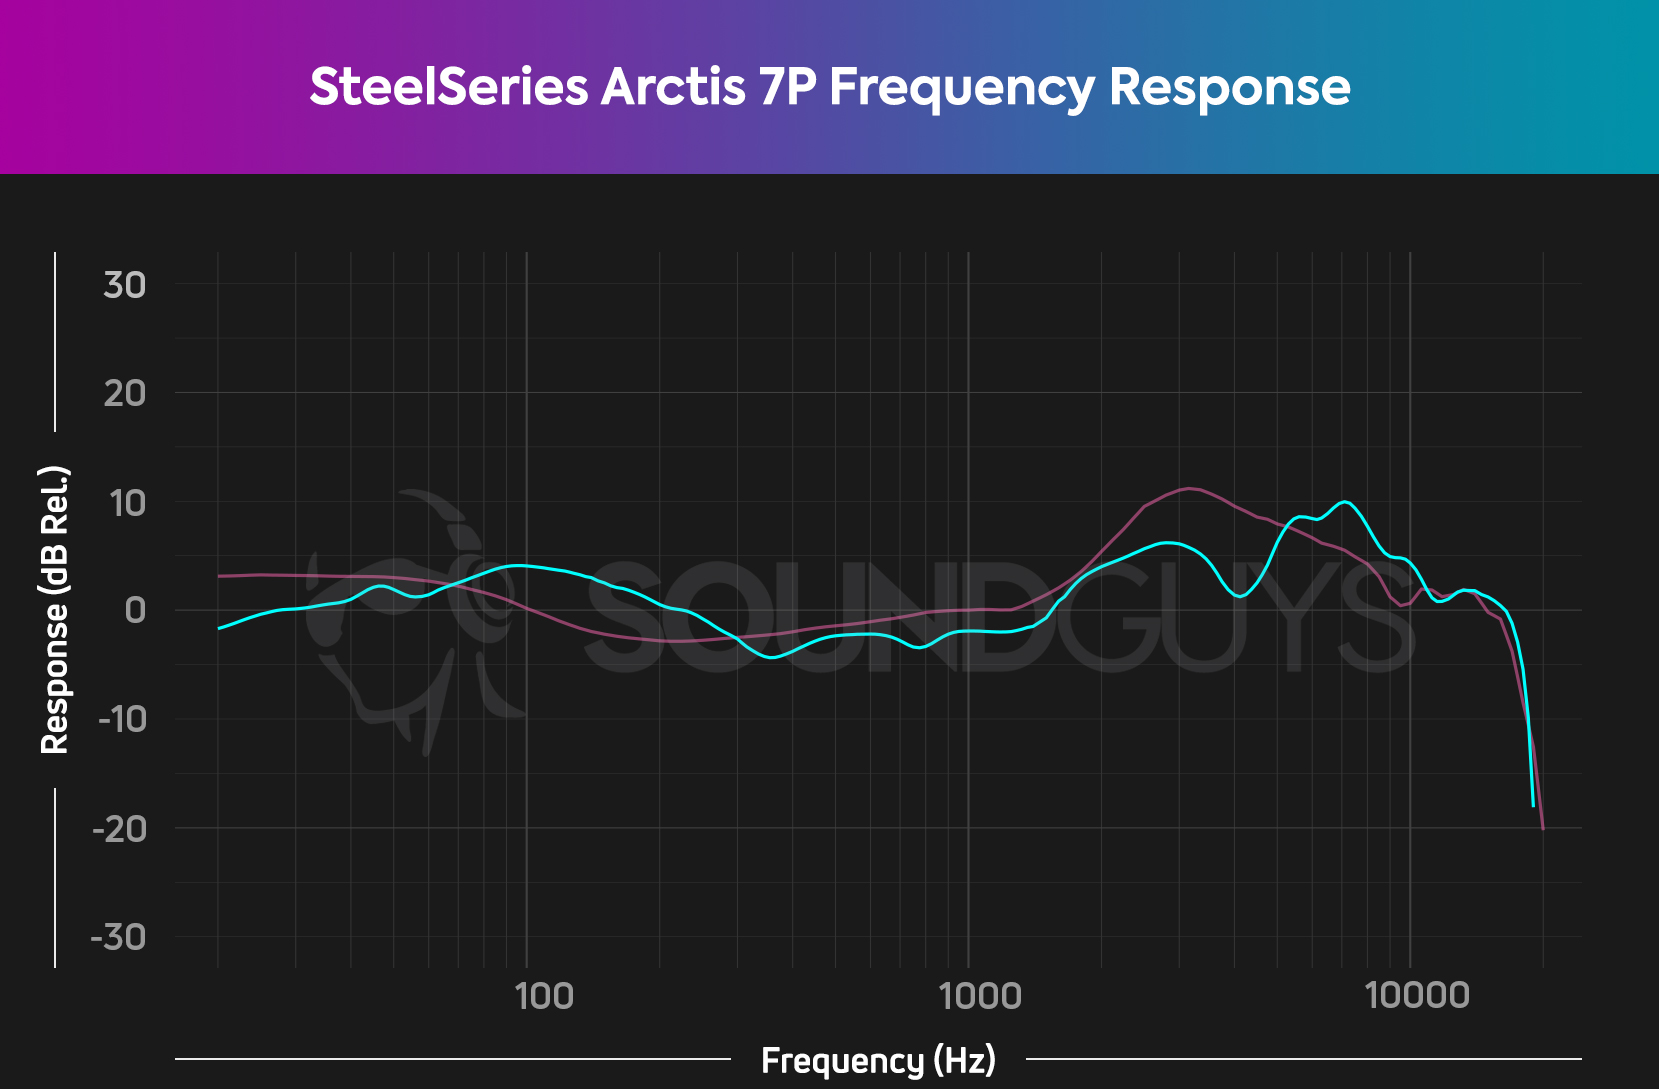 A frequency response chart for the SteelSeries Arctis 7P, which shows very accurate audio compared to our target curve.